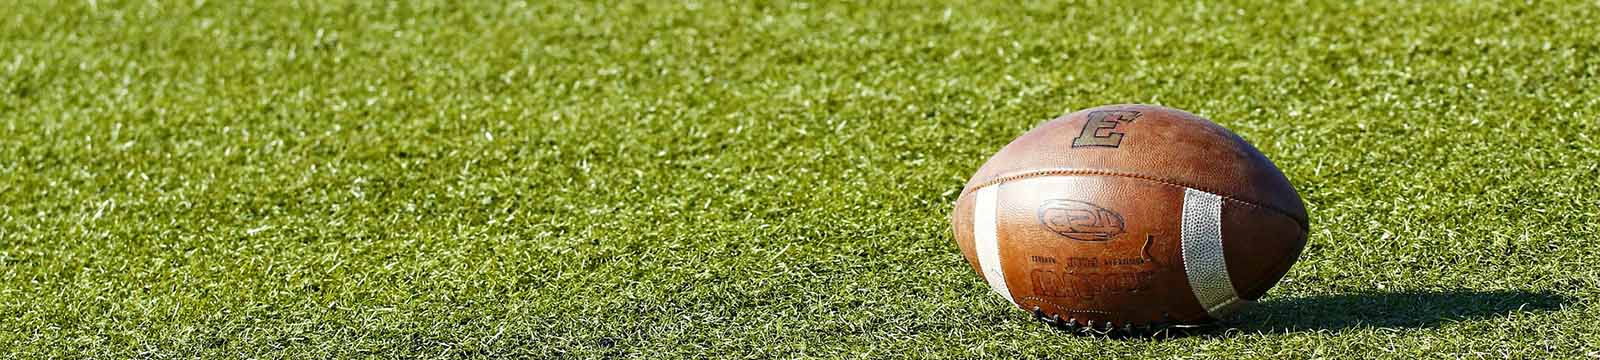 Photo of a football on a field.